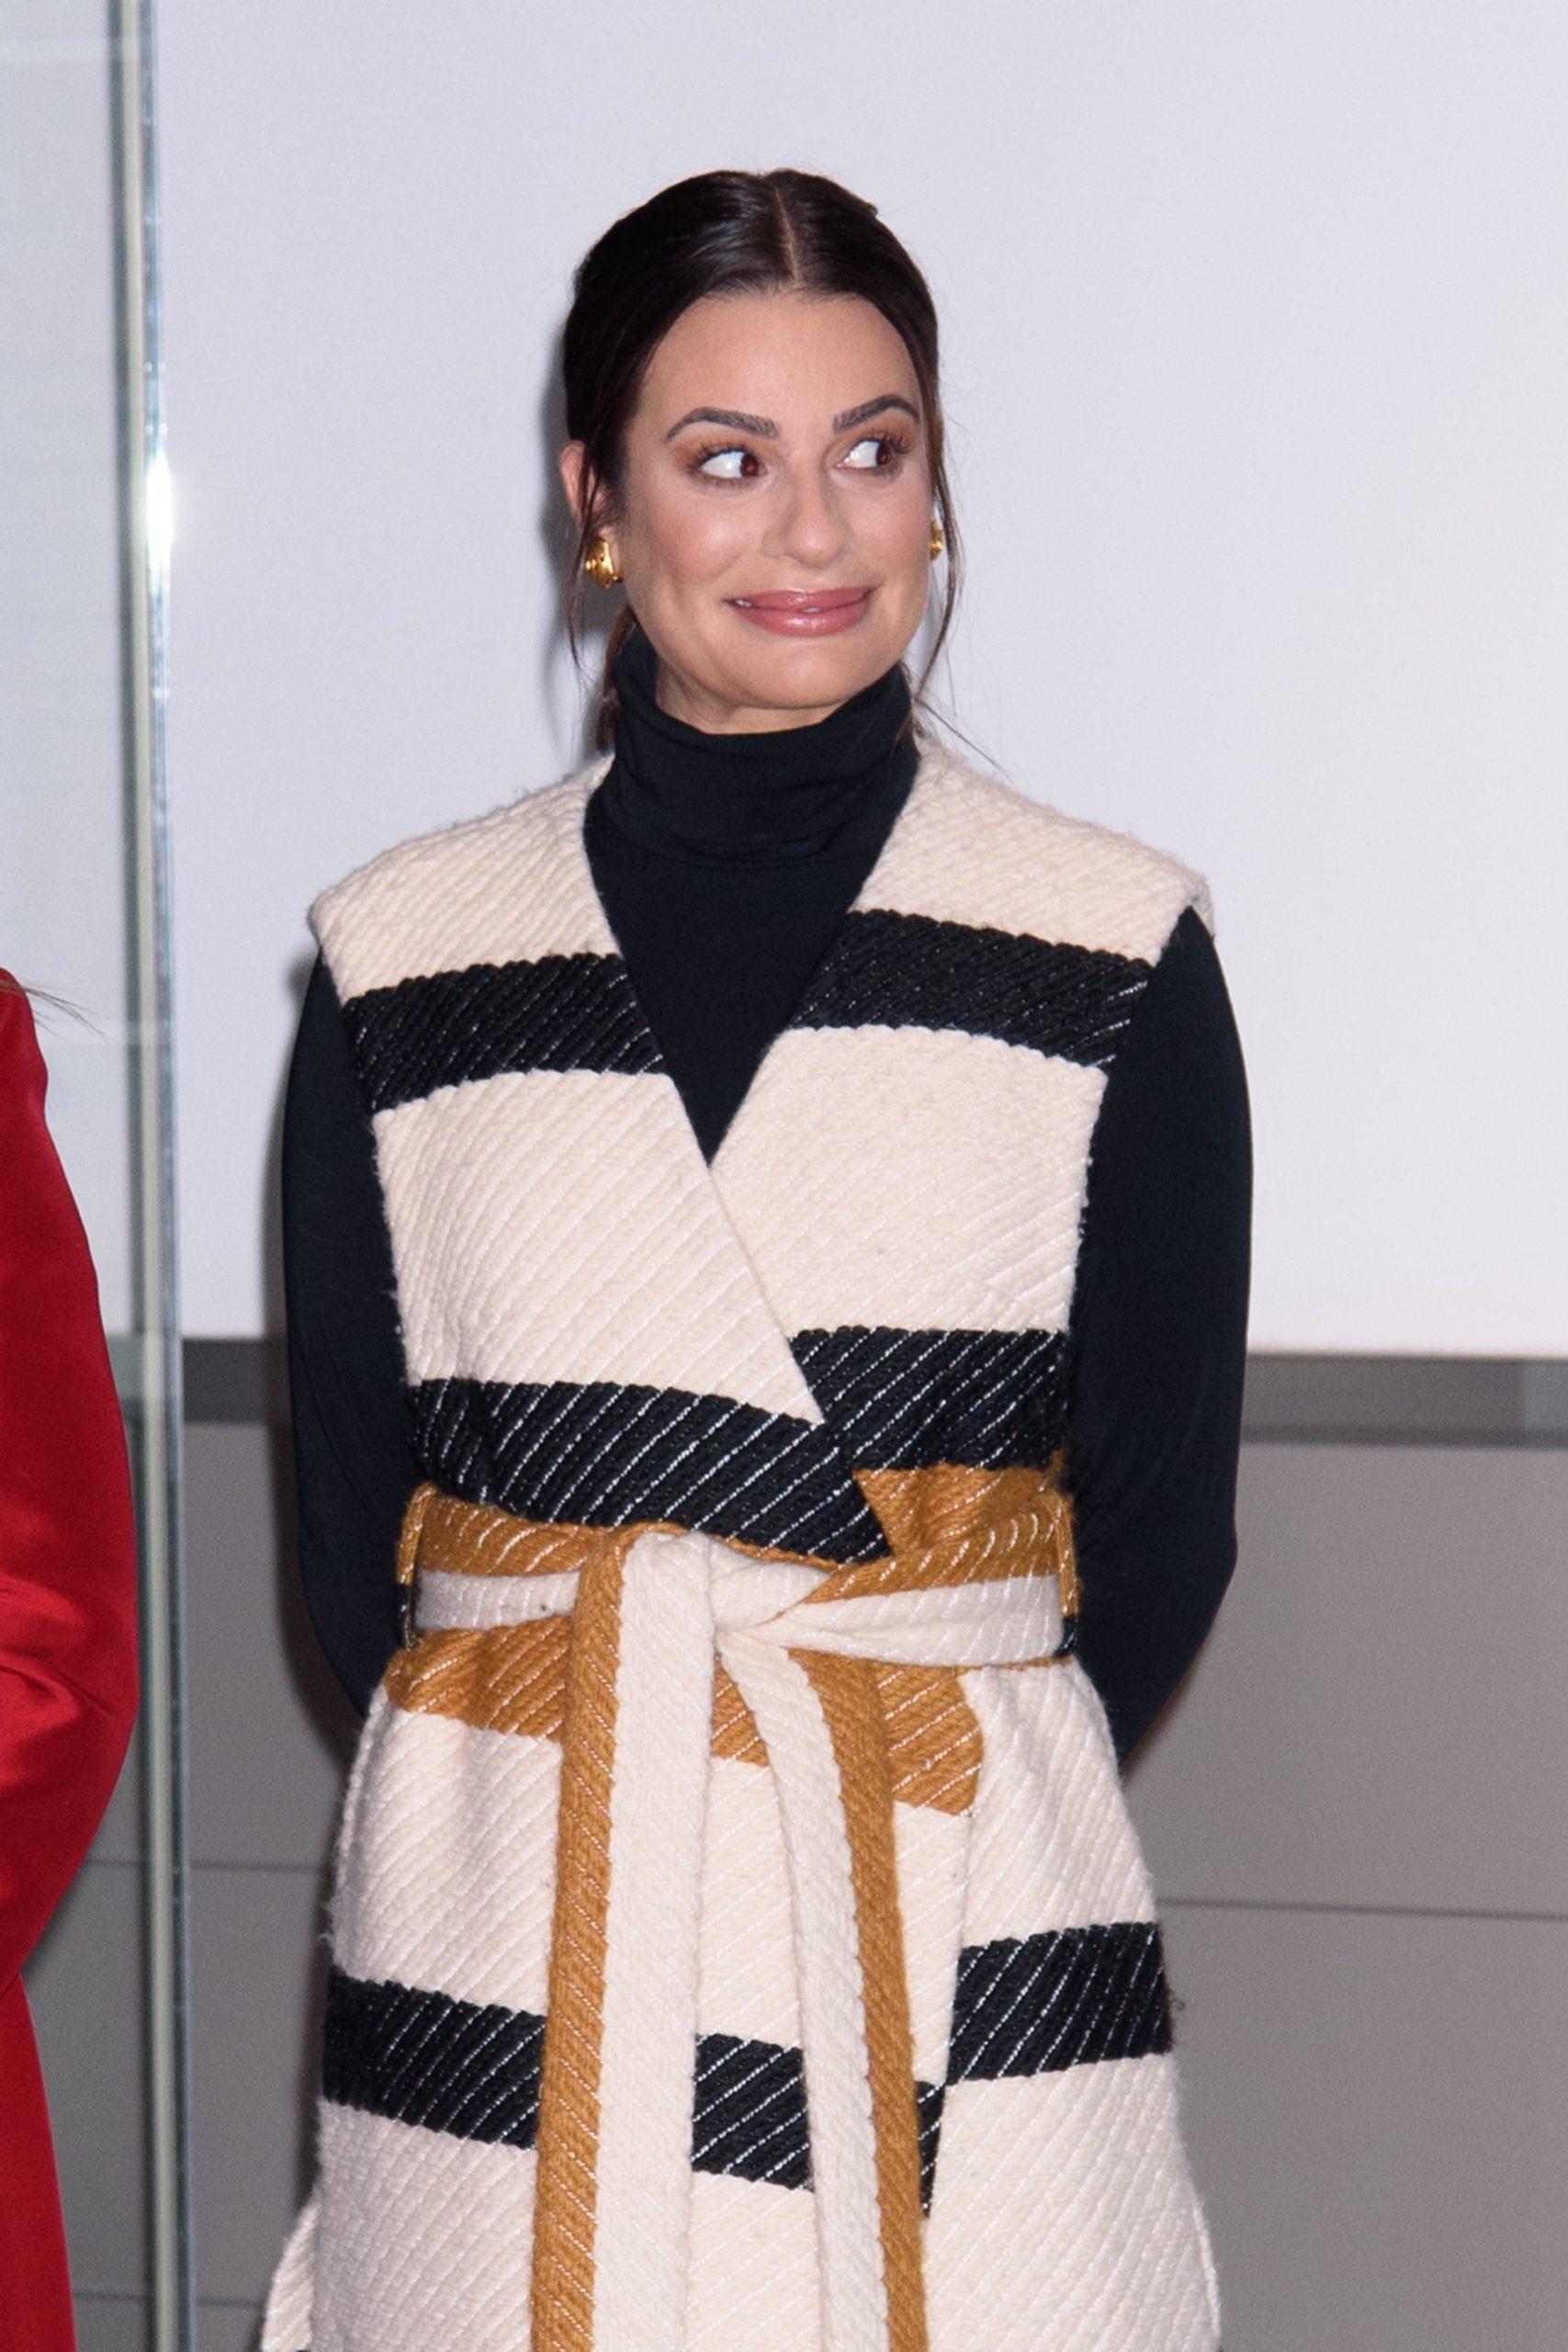 Lea Michele Celebrates 2019 Holiday Light Show at Empire State Building